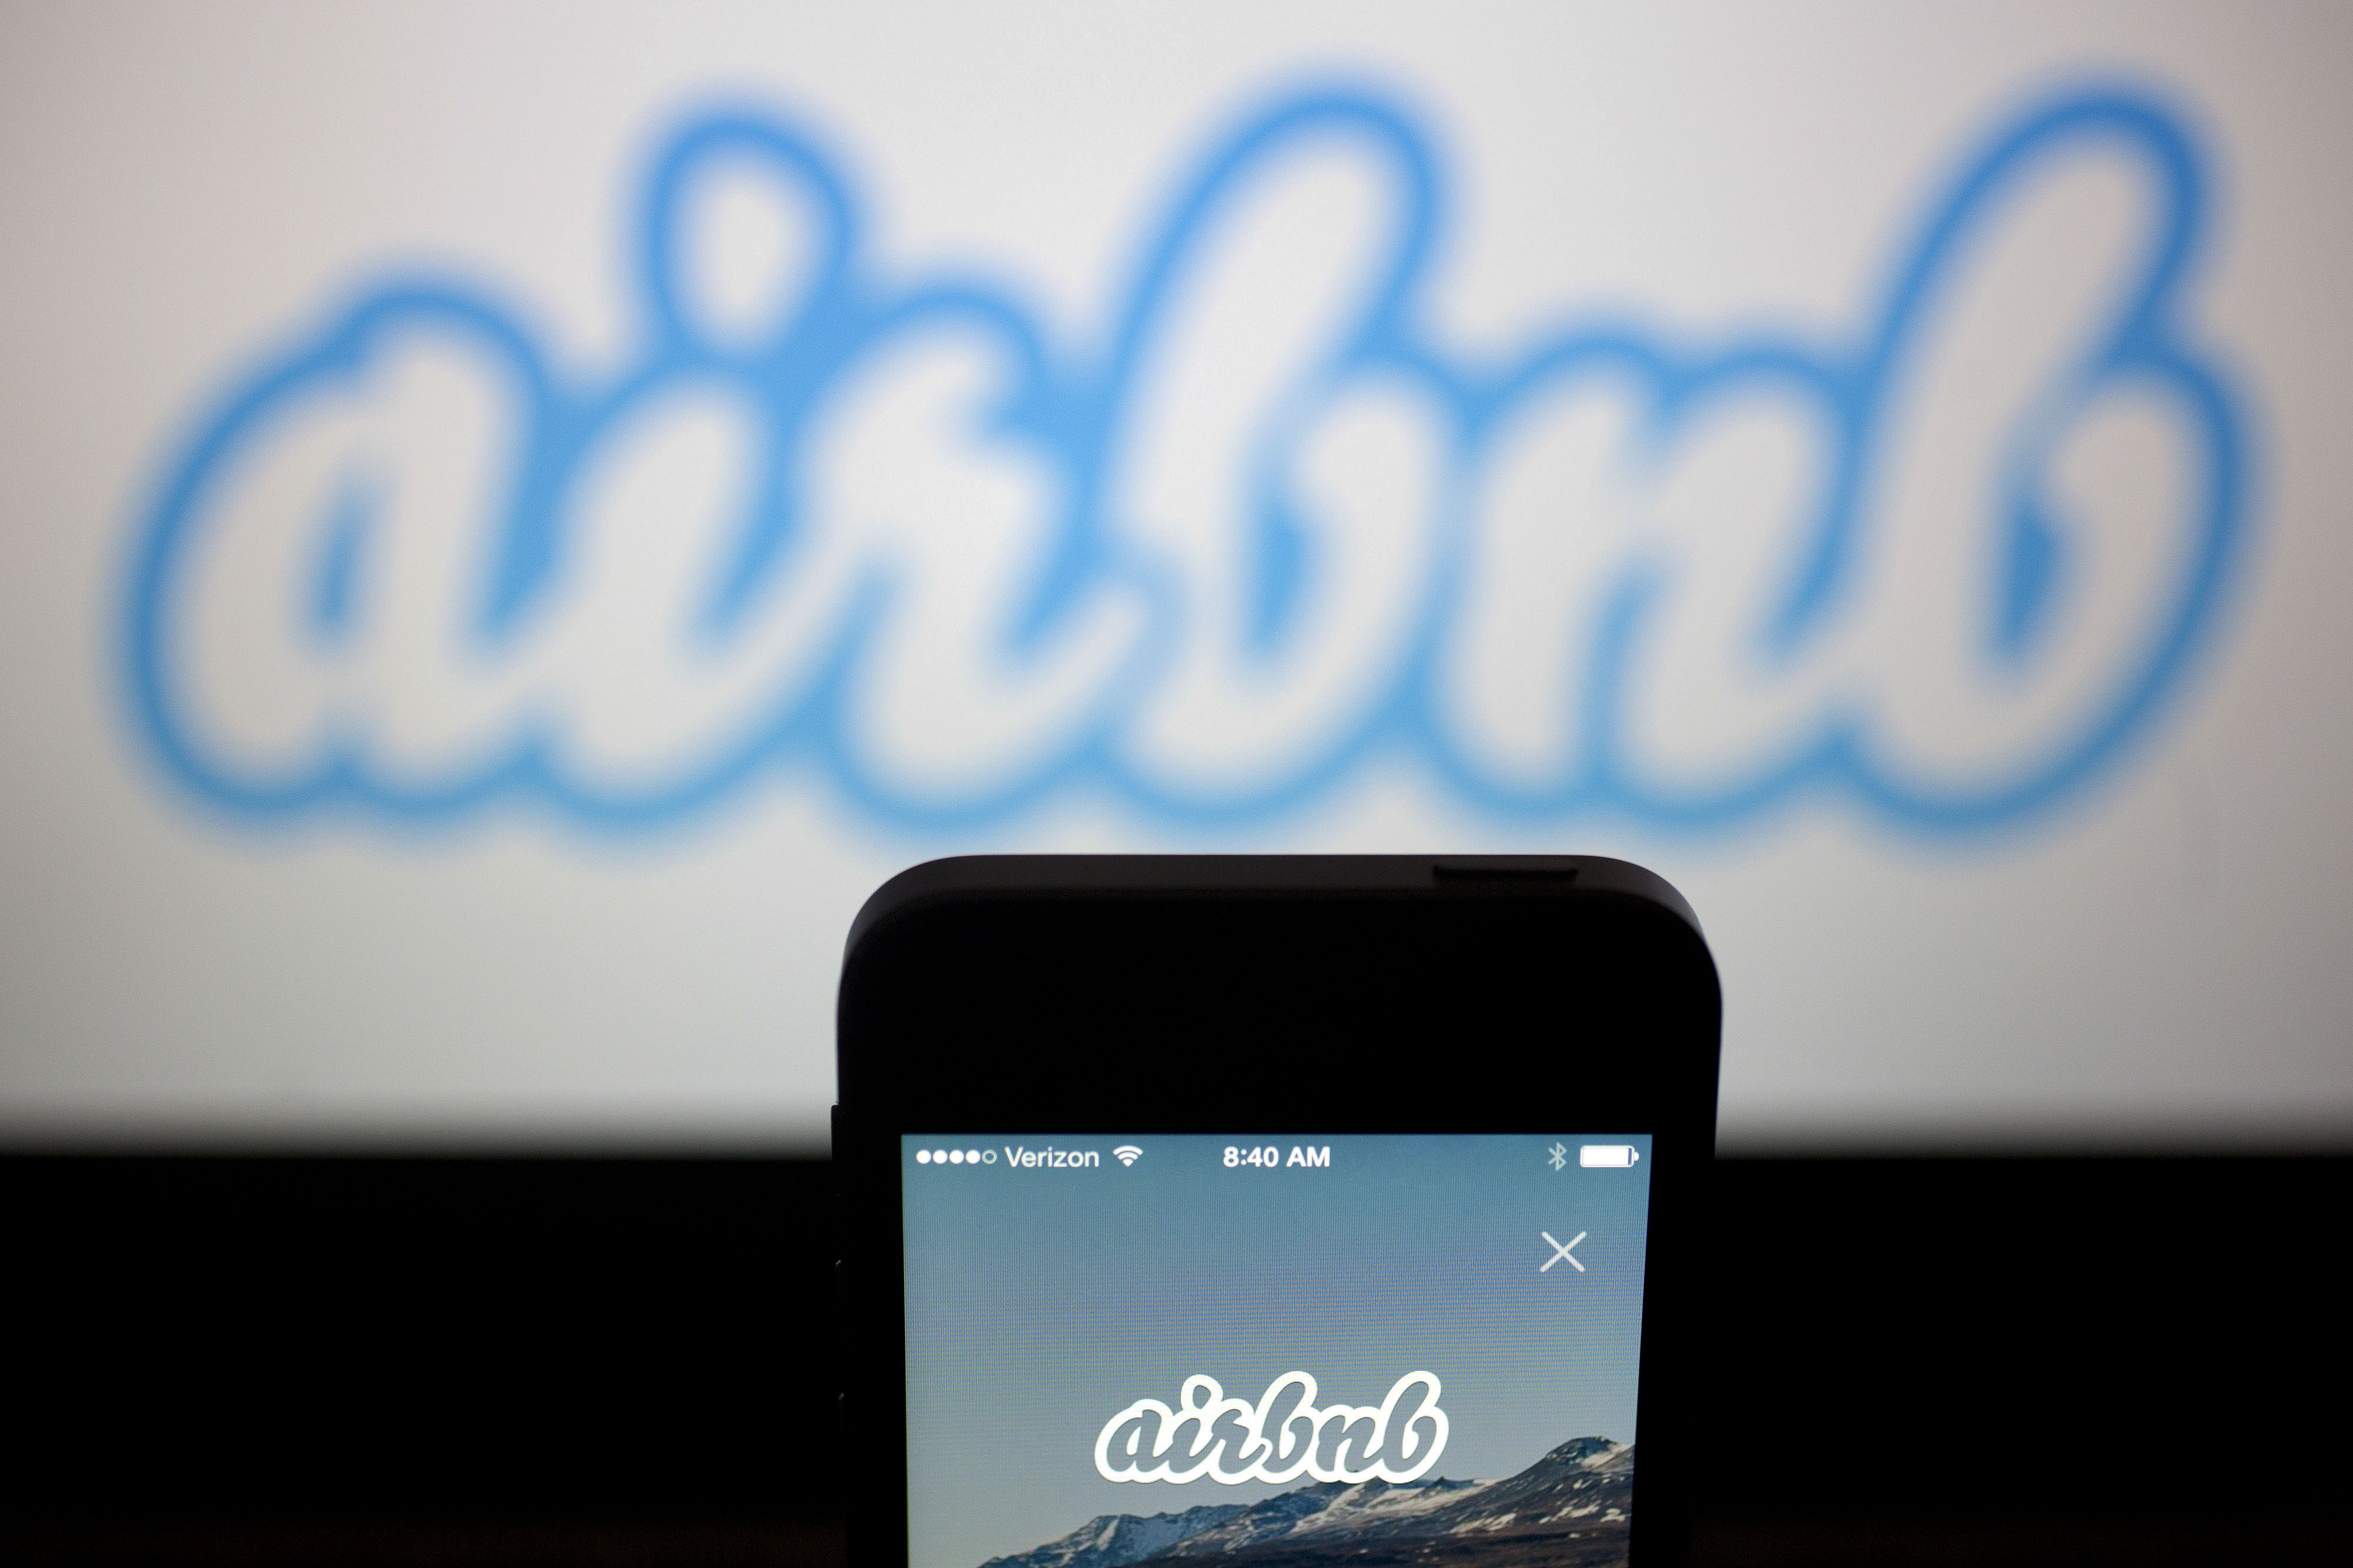 The Airbnb application and logo are displayed on an Apple iPhone in this arranged photograph in Washington, D.C., on March 21, 2014 (Andrew Harrer—Bloomberg/Getty Images)